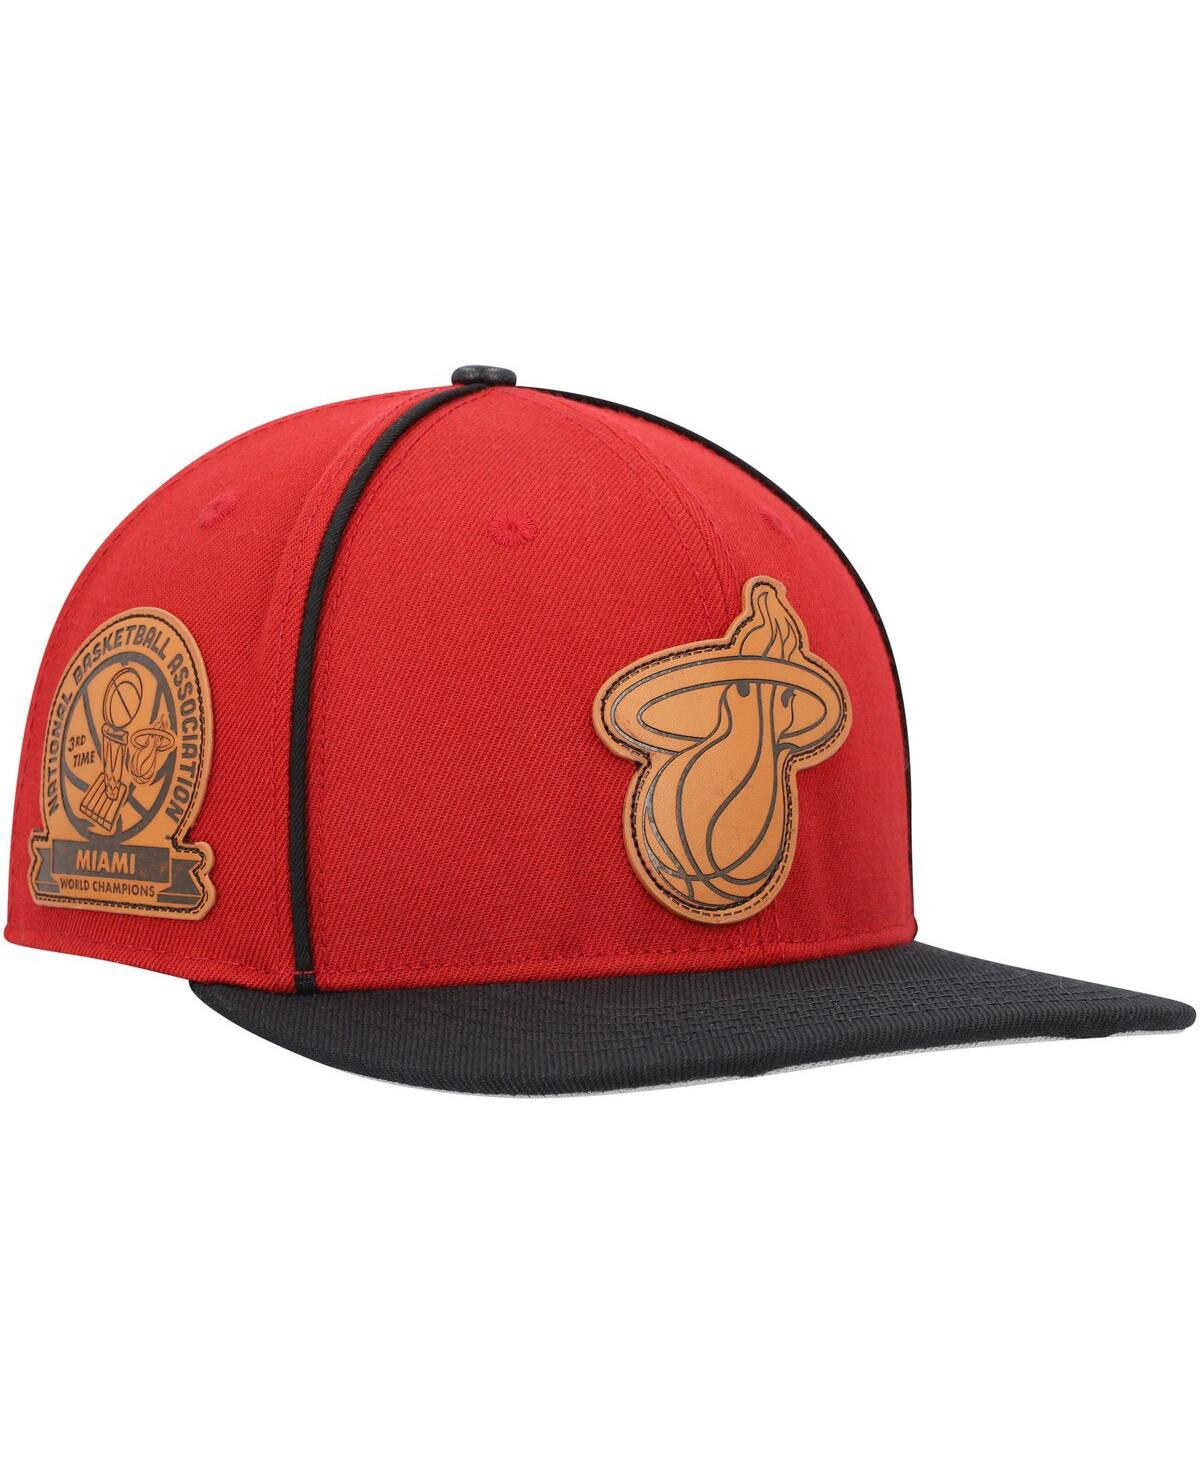 Pro Standard Men's  Red, Black Miami Heat Heritage Leather Patch Snapback Hat In Red,black